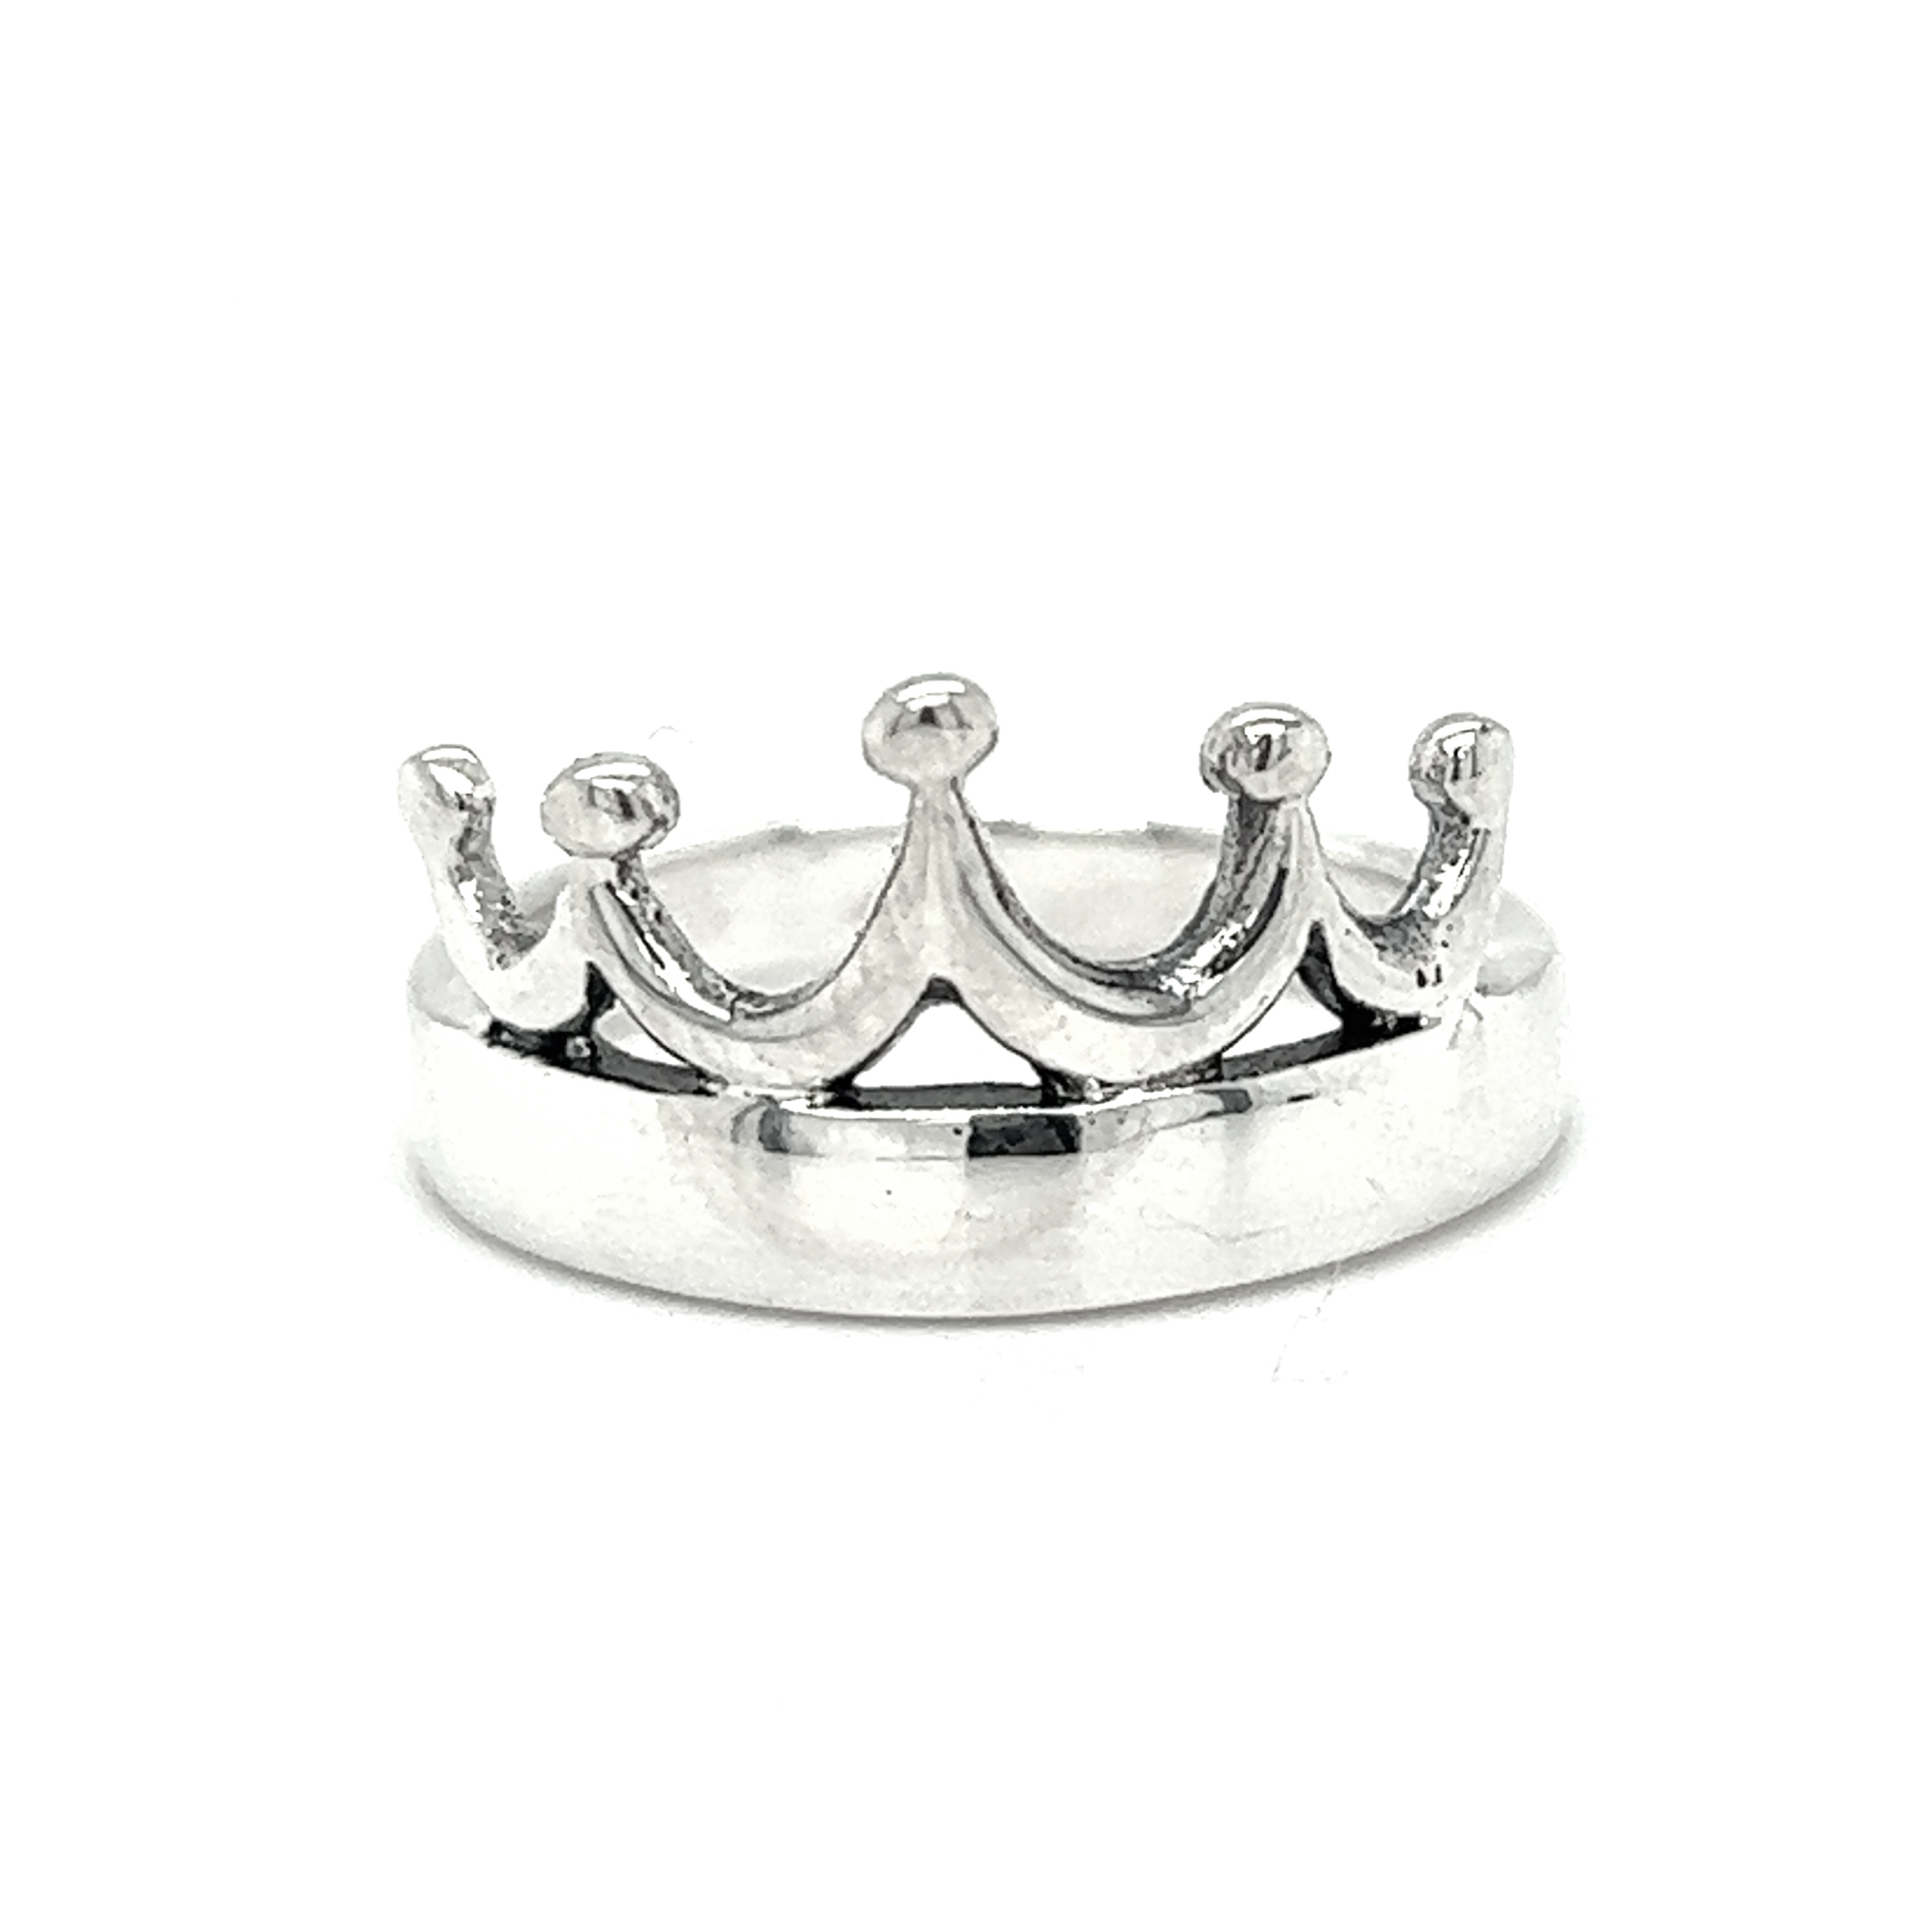 Elegant Crown Purity Ring For Fashionistas - Inspire Uplift